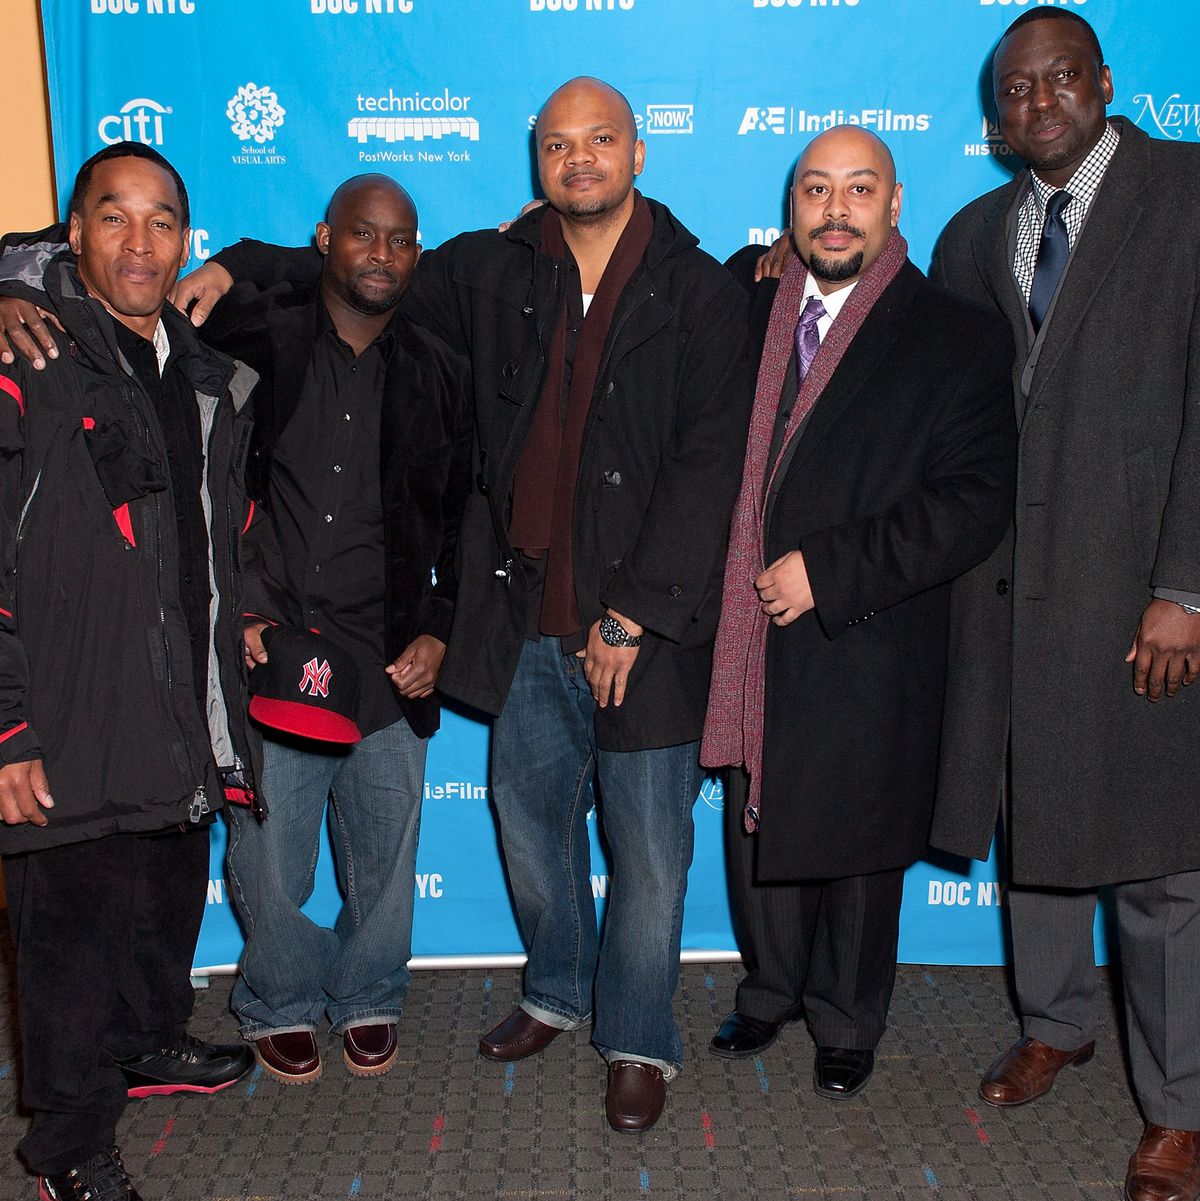 Who Are The Central Park Five? Story Behind 'When They See Us'